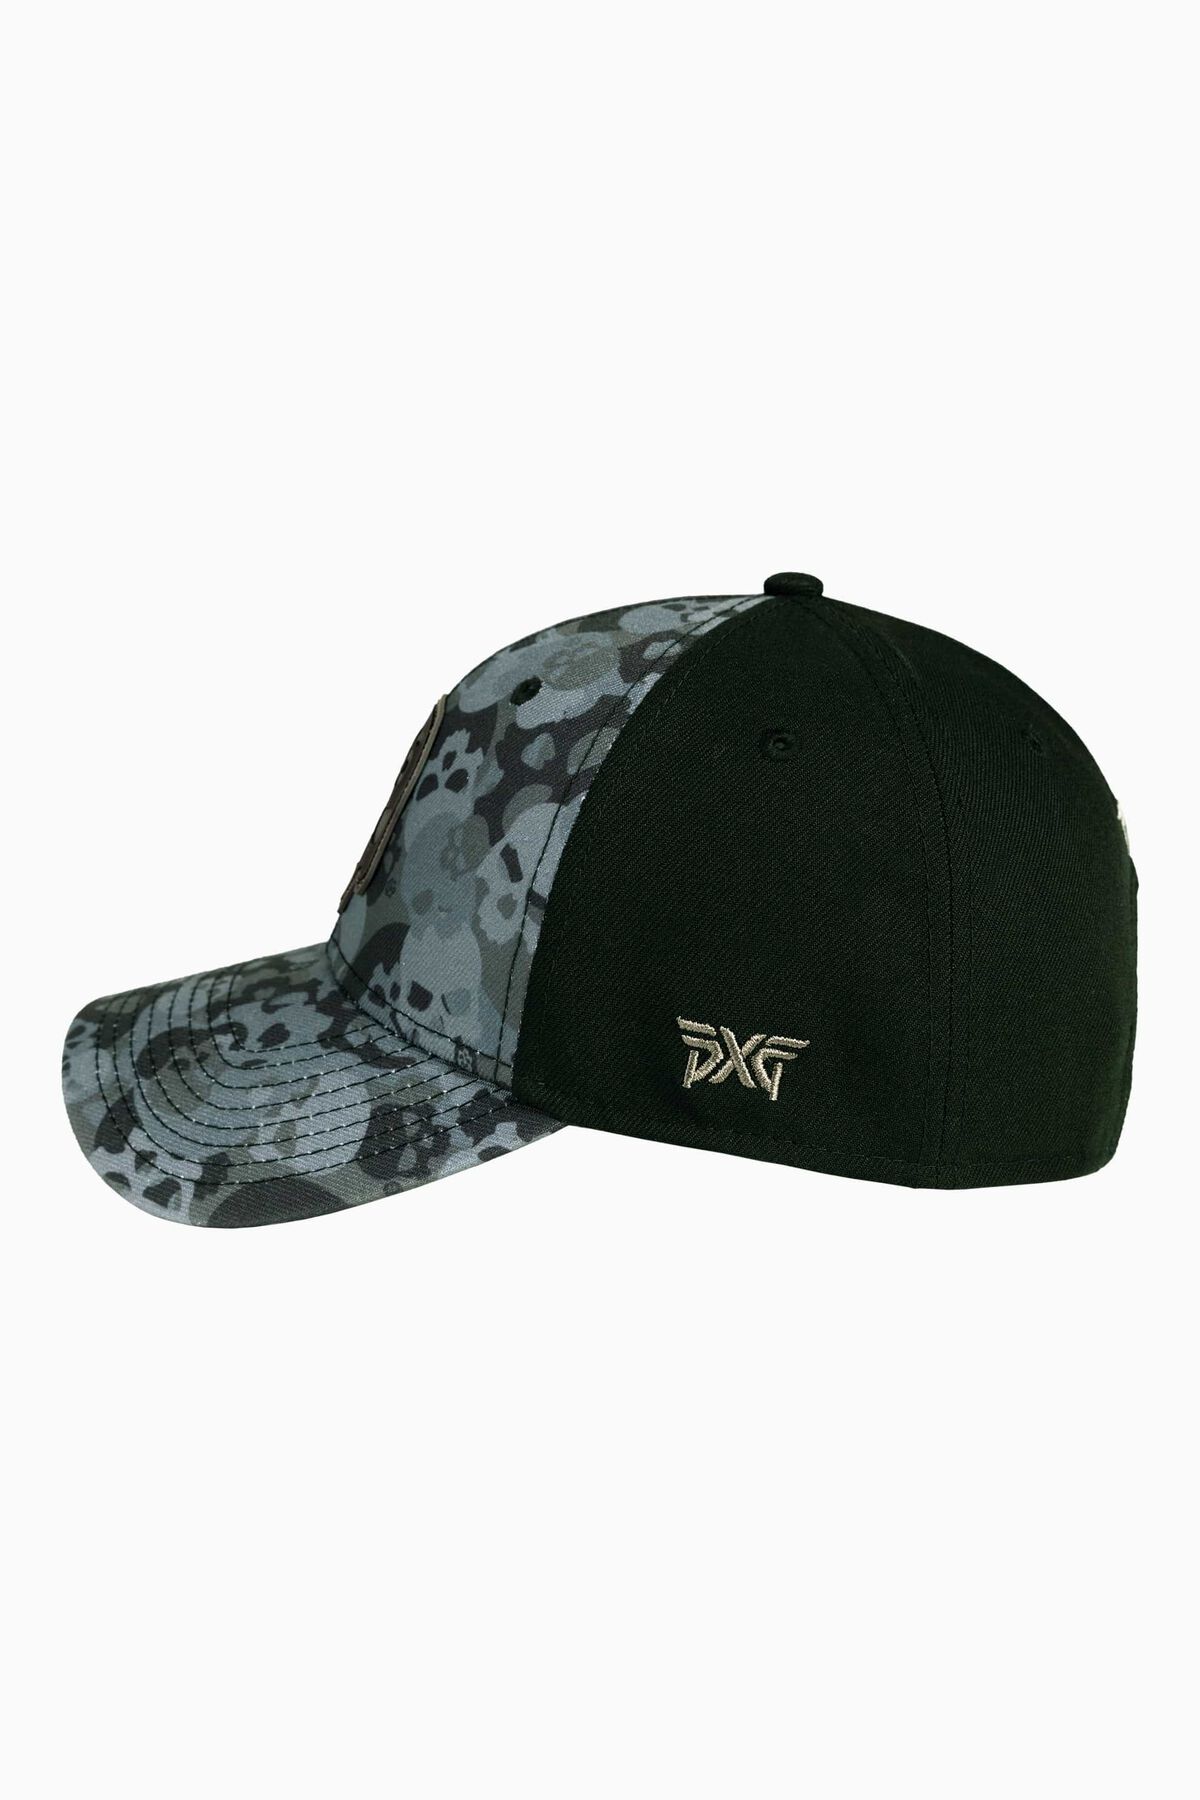 Darkness Skull Camo Stitched Logo 9FORTY Snapback Cap 